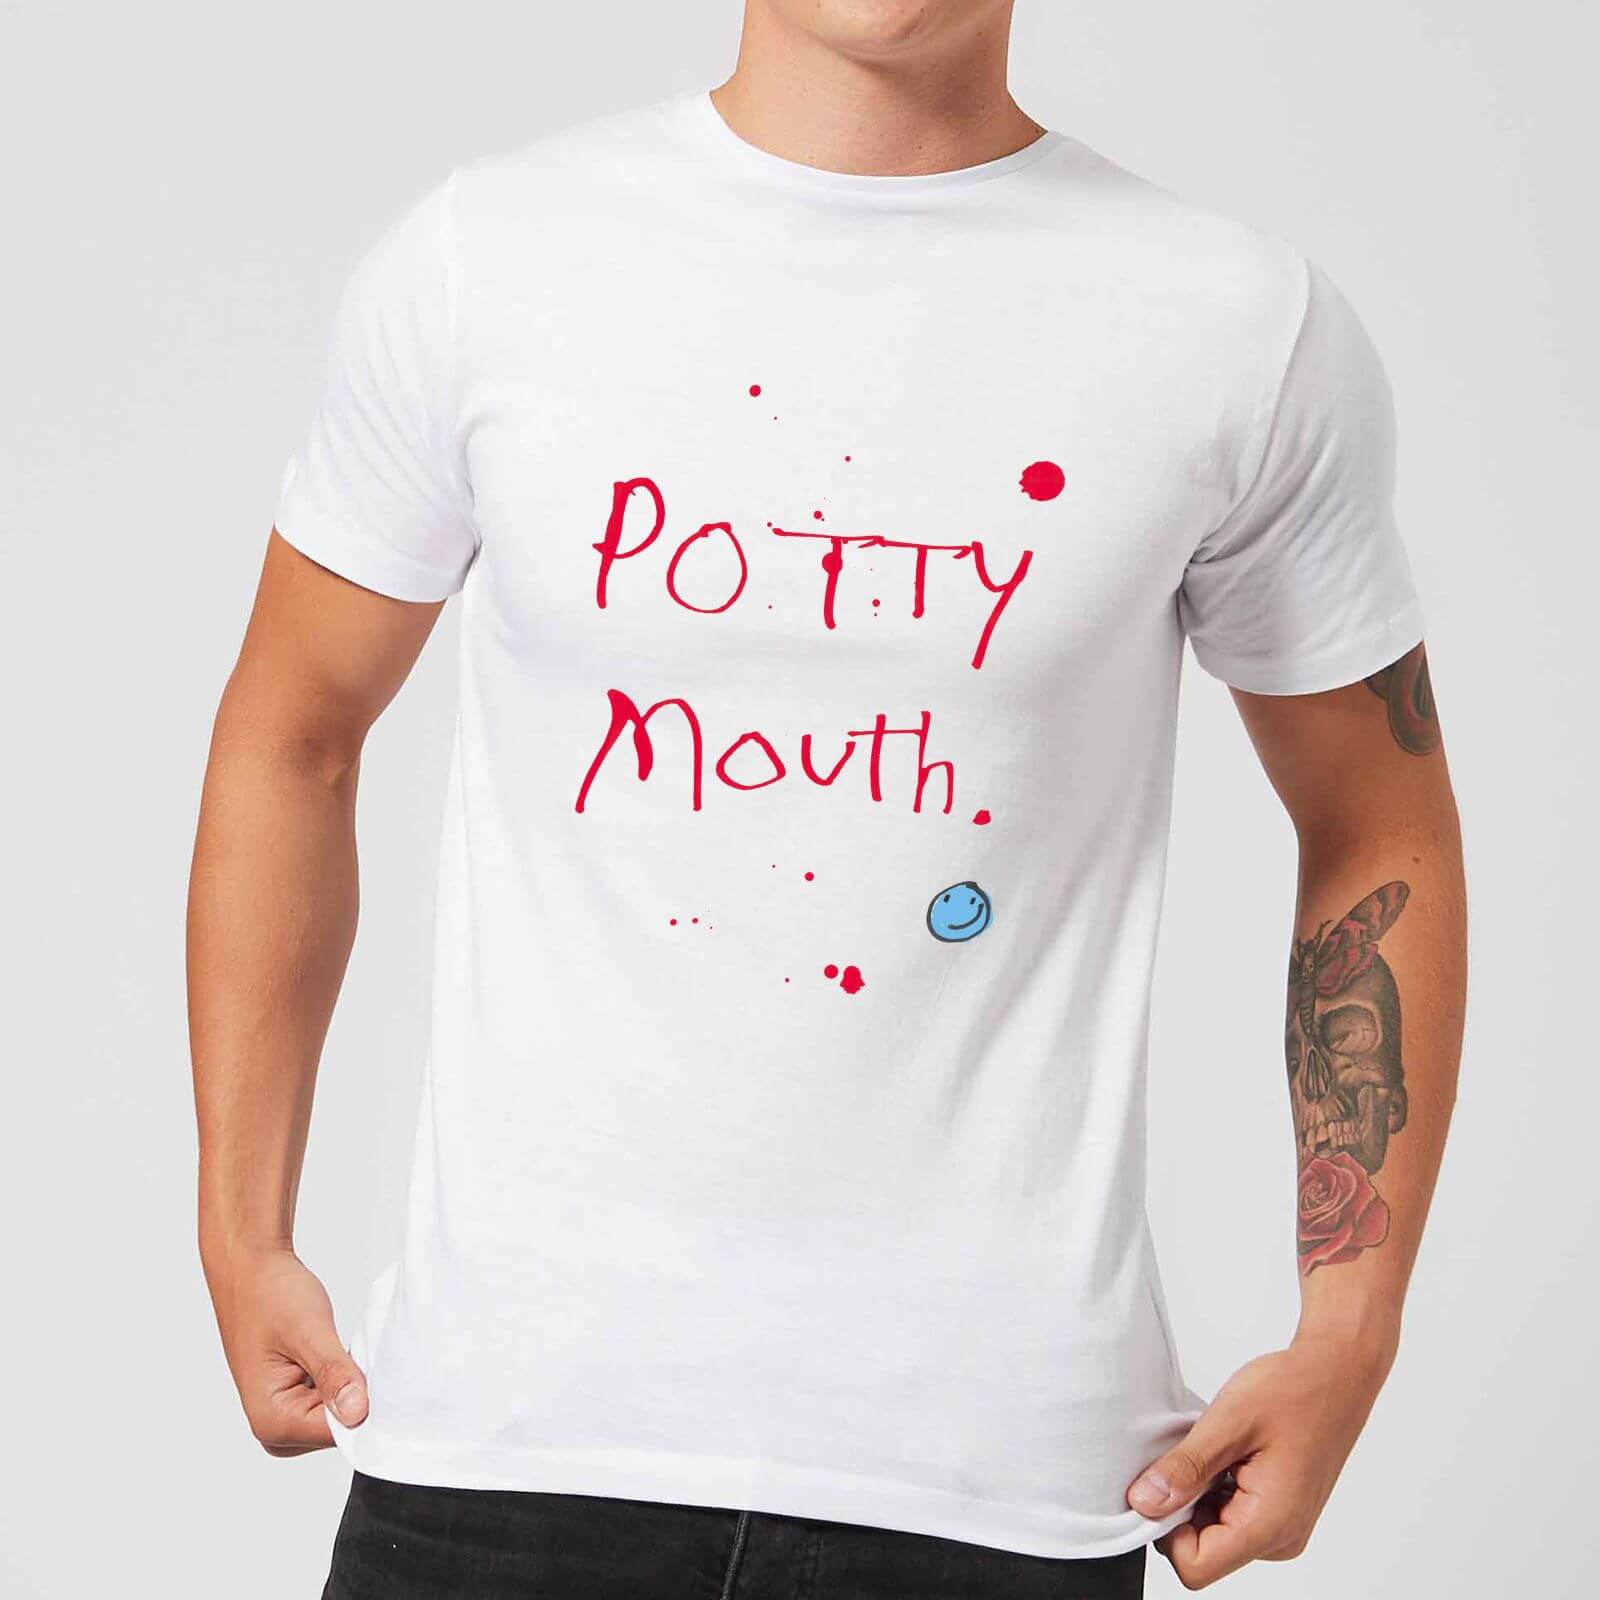 Poet and Painter Potty Mouth Men's T-Shirt - White - S - White